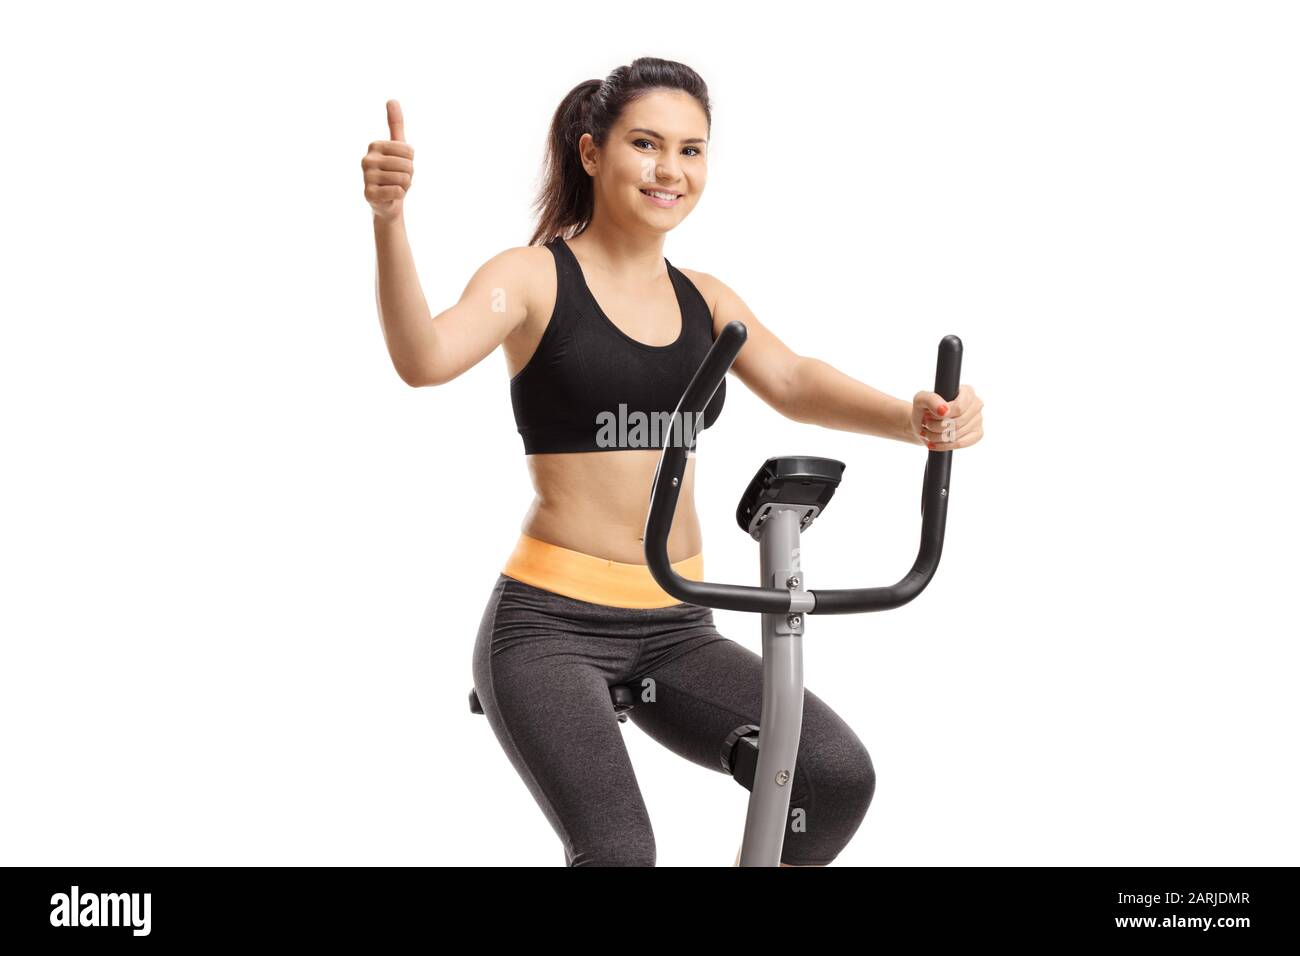 Girl riding a stationary bike and showing thumb up isolated on white background Stock Photo